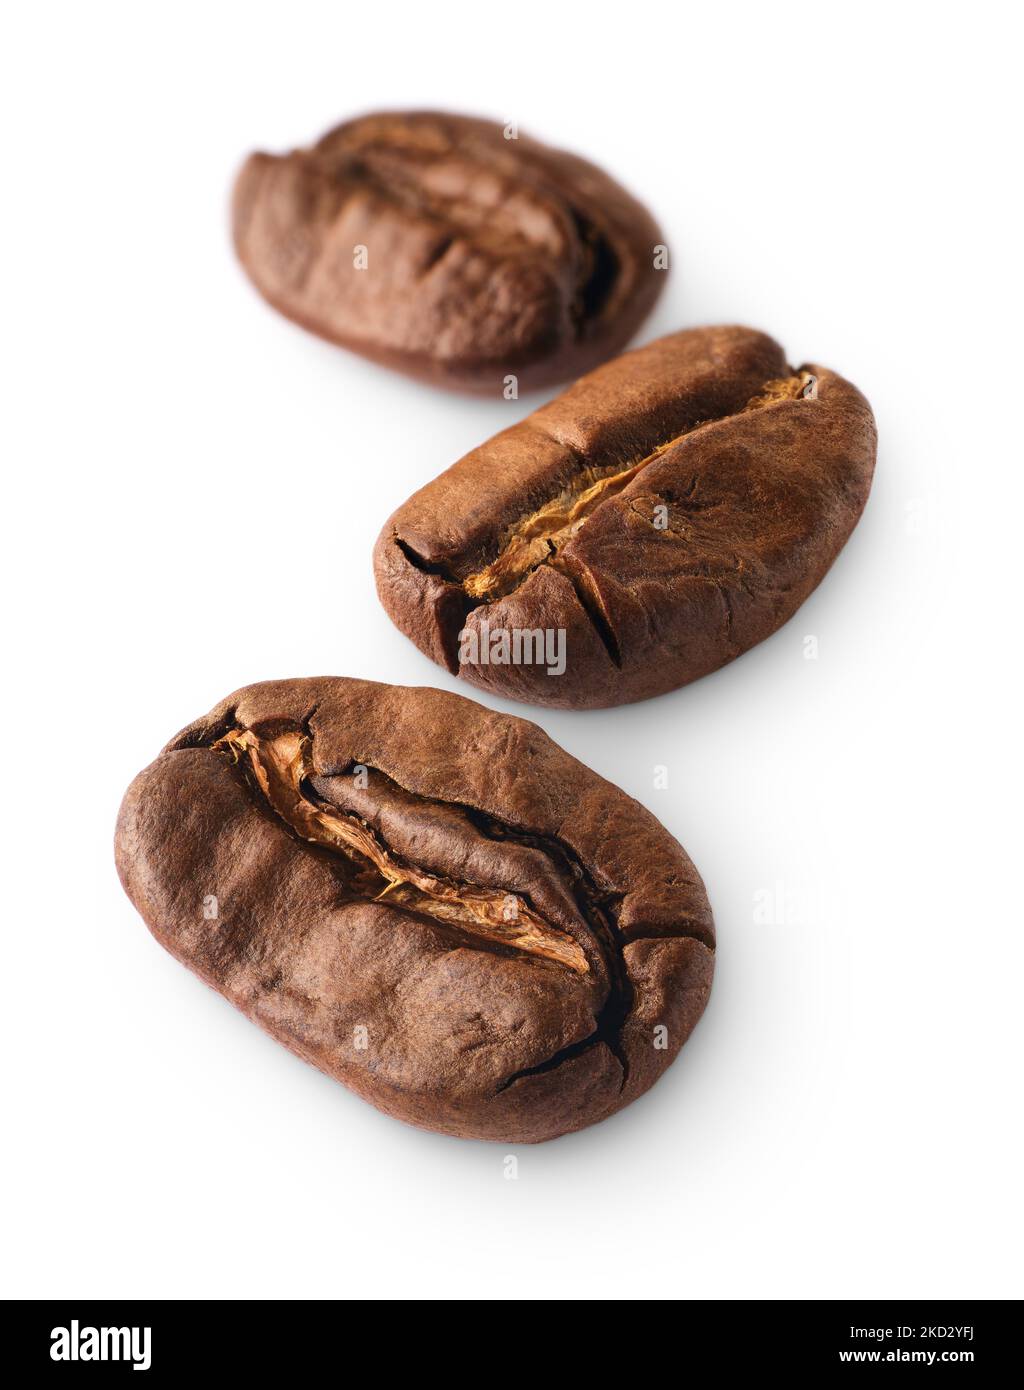 Group of roasted arabica coffee beans, isolated on white background Stock Photo